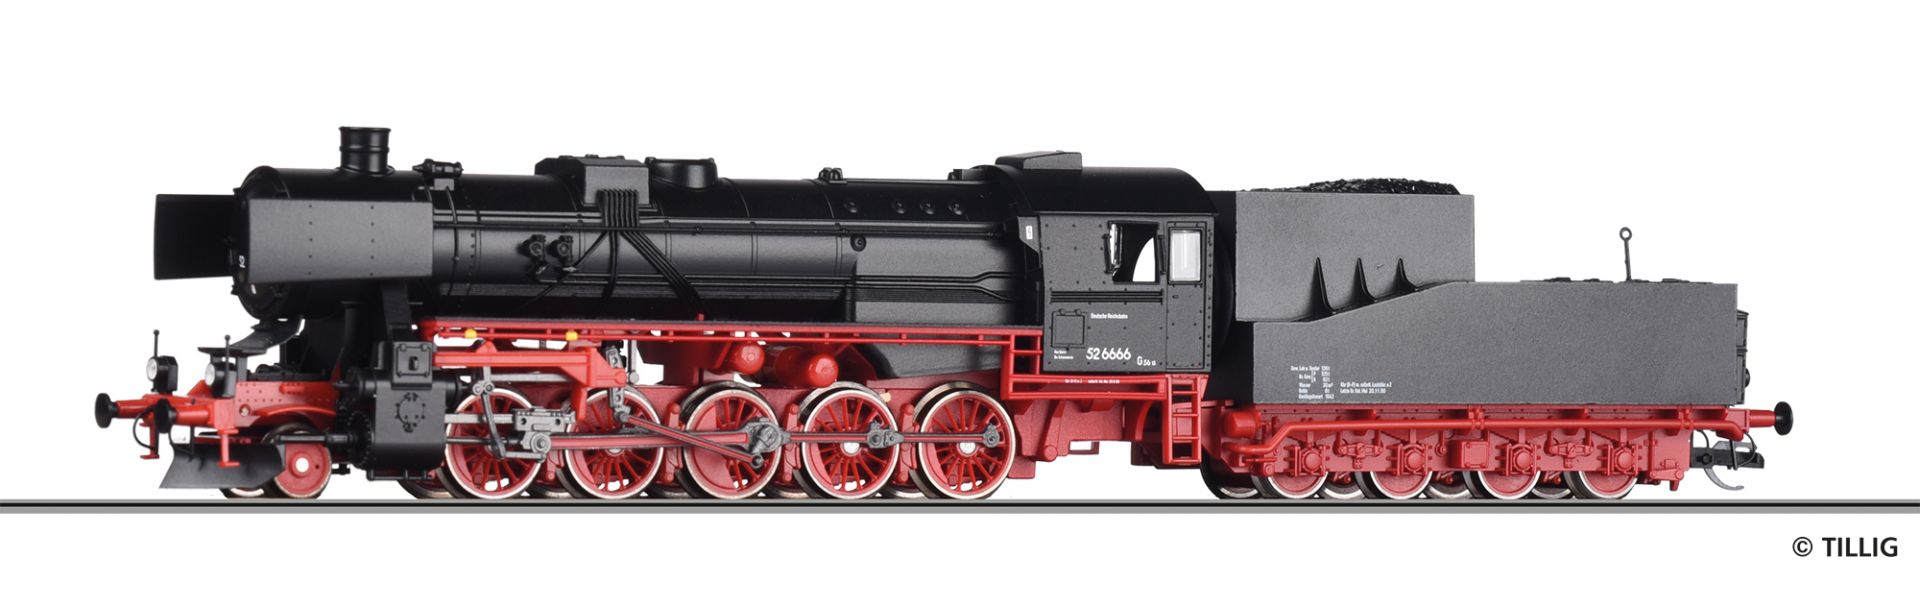 502390 | Steam locomotive Museum -sold out-